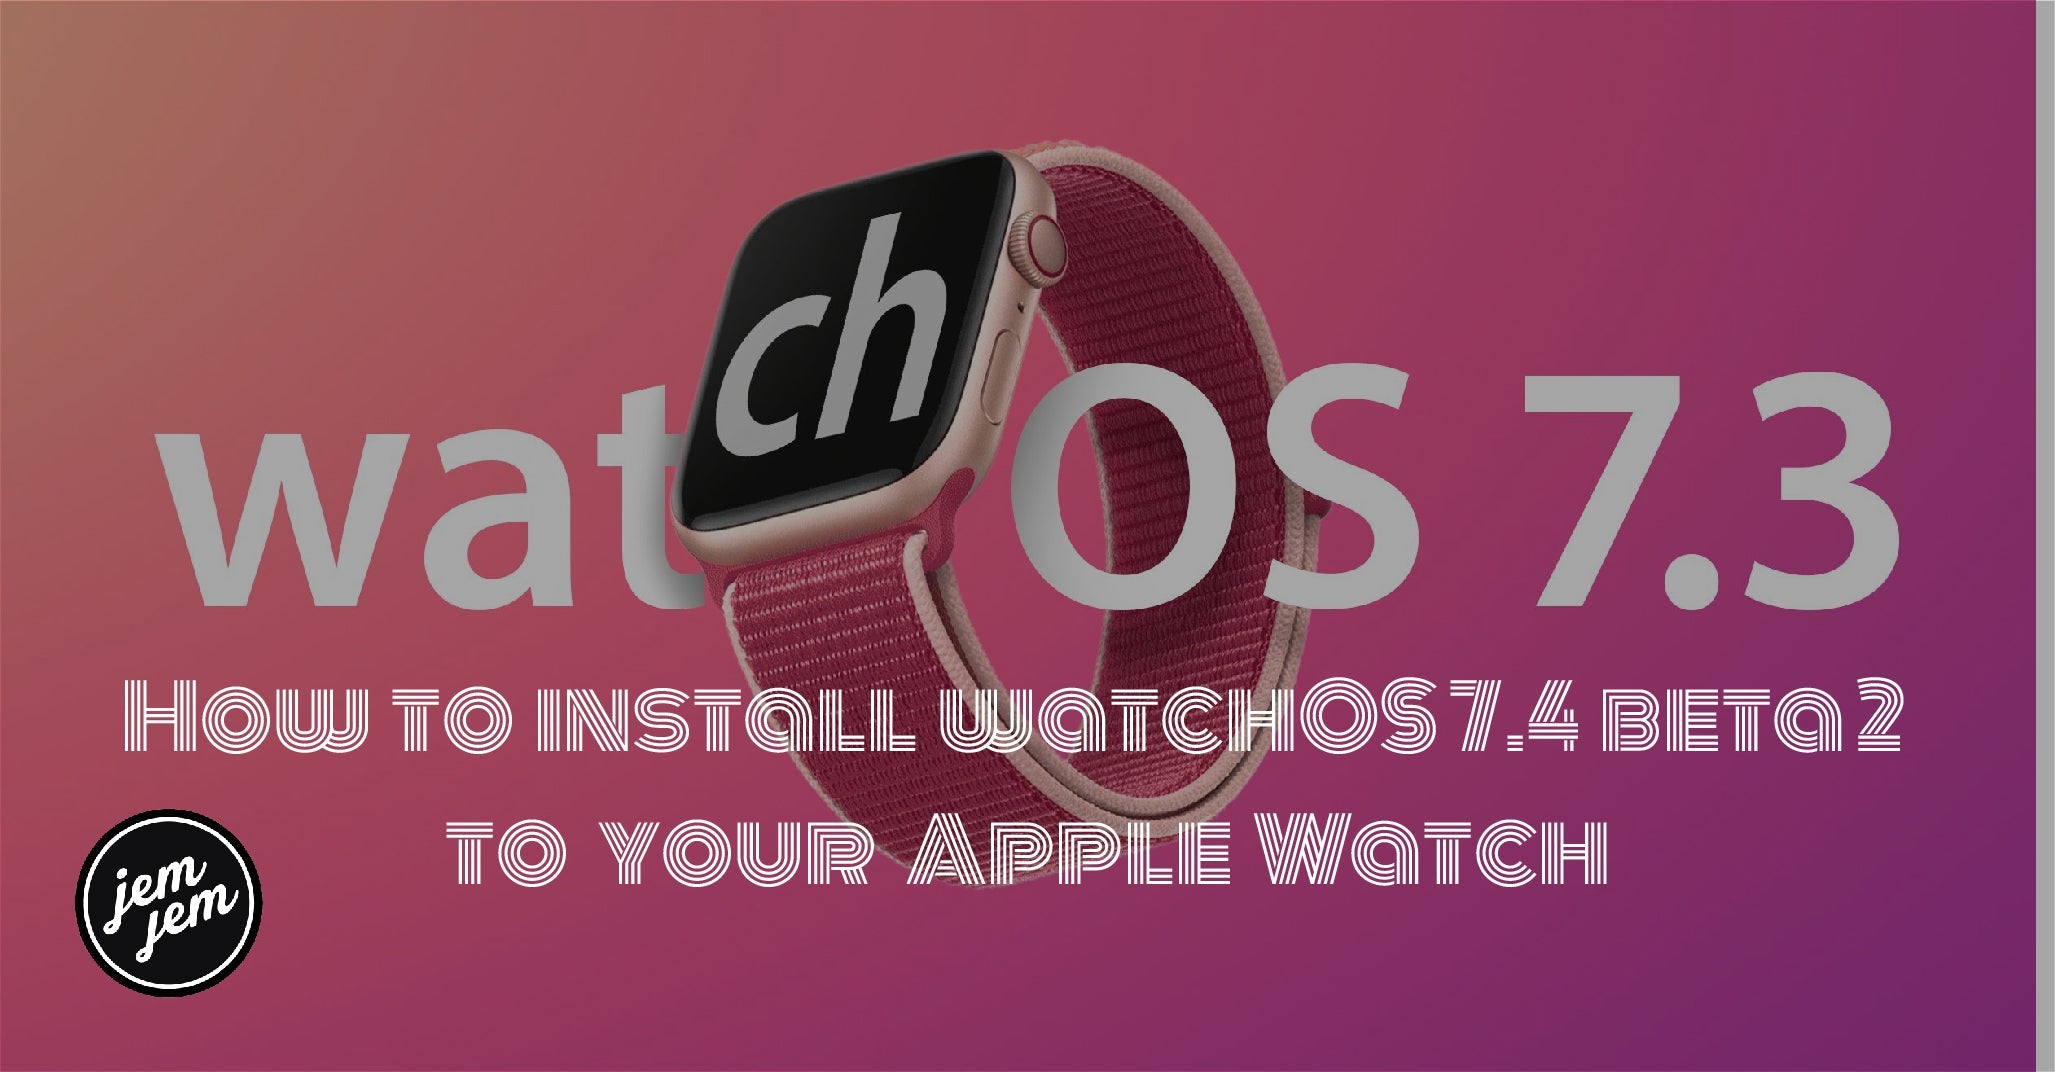 How to install watchOS 7.4 beta 2 to your Apple Watch